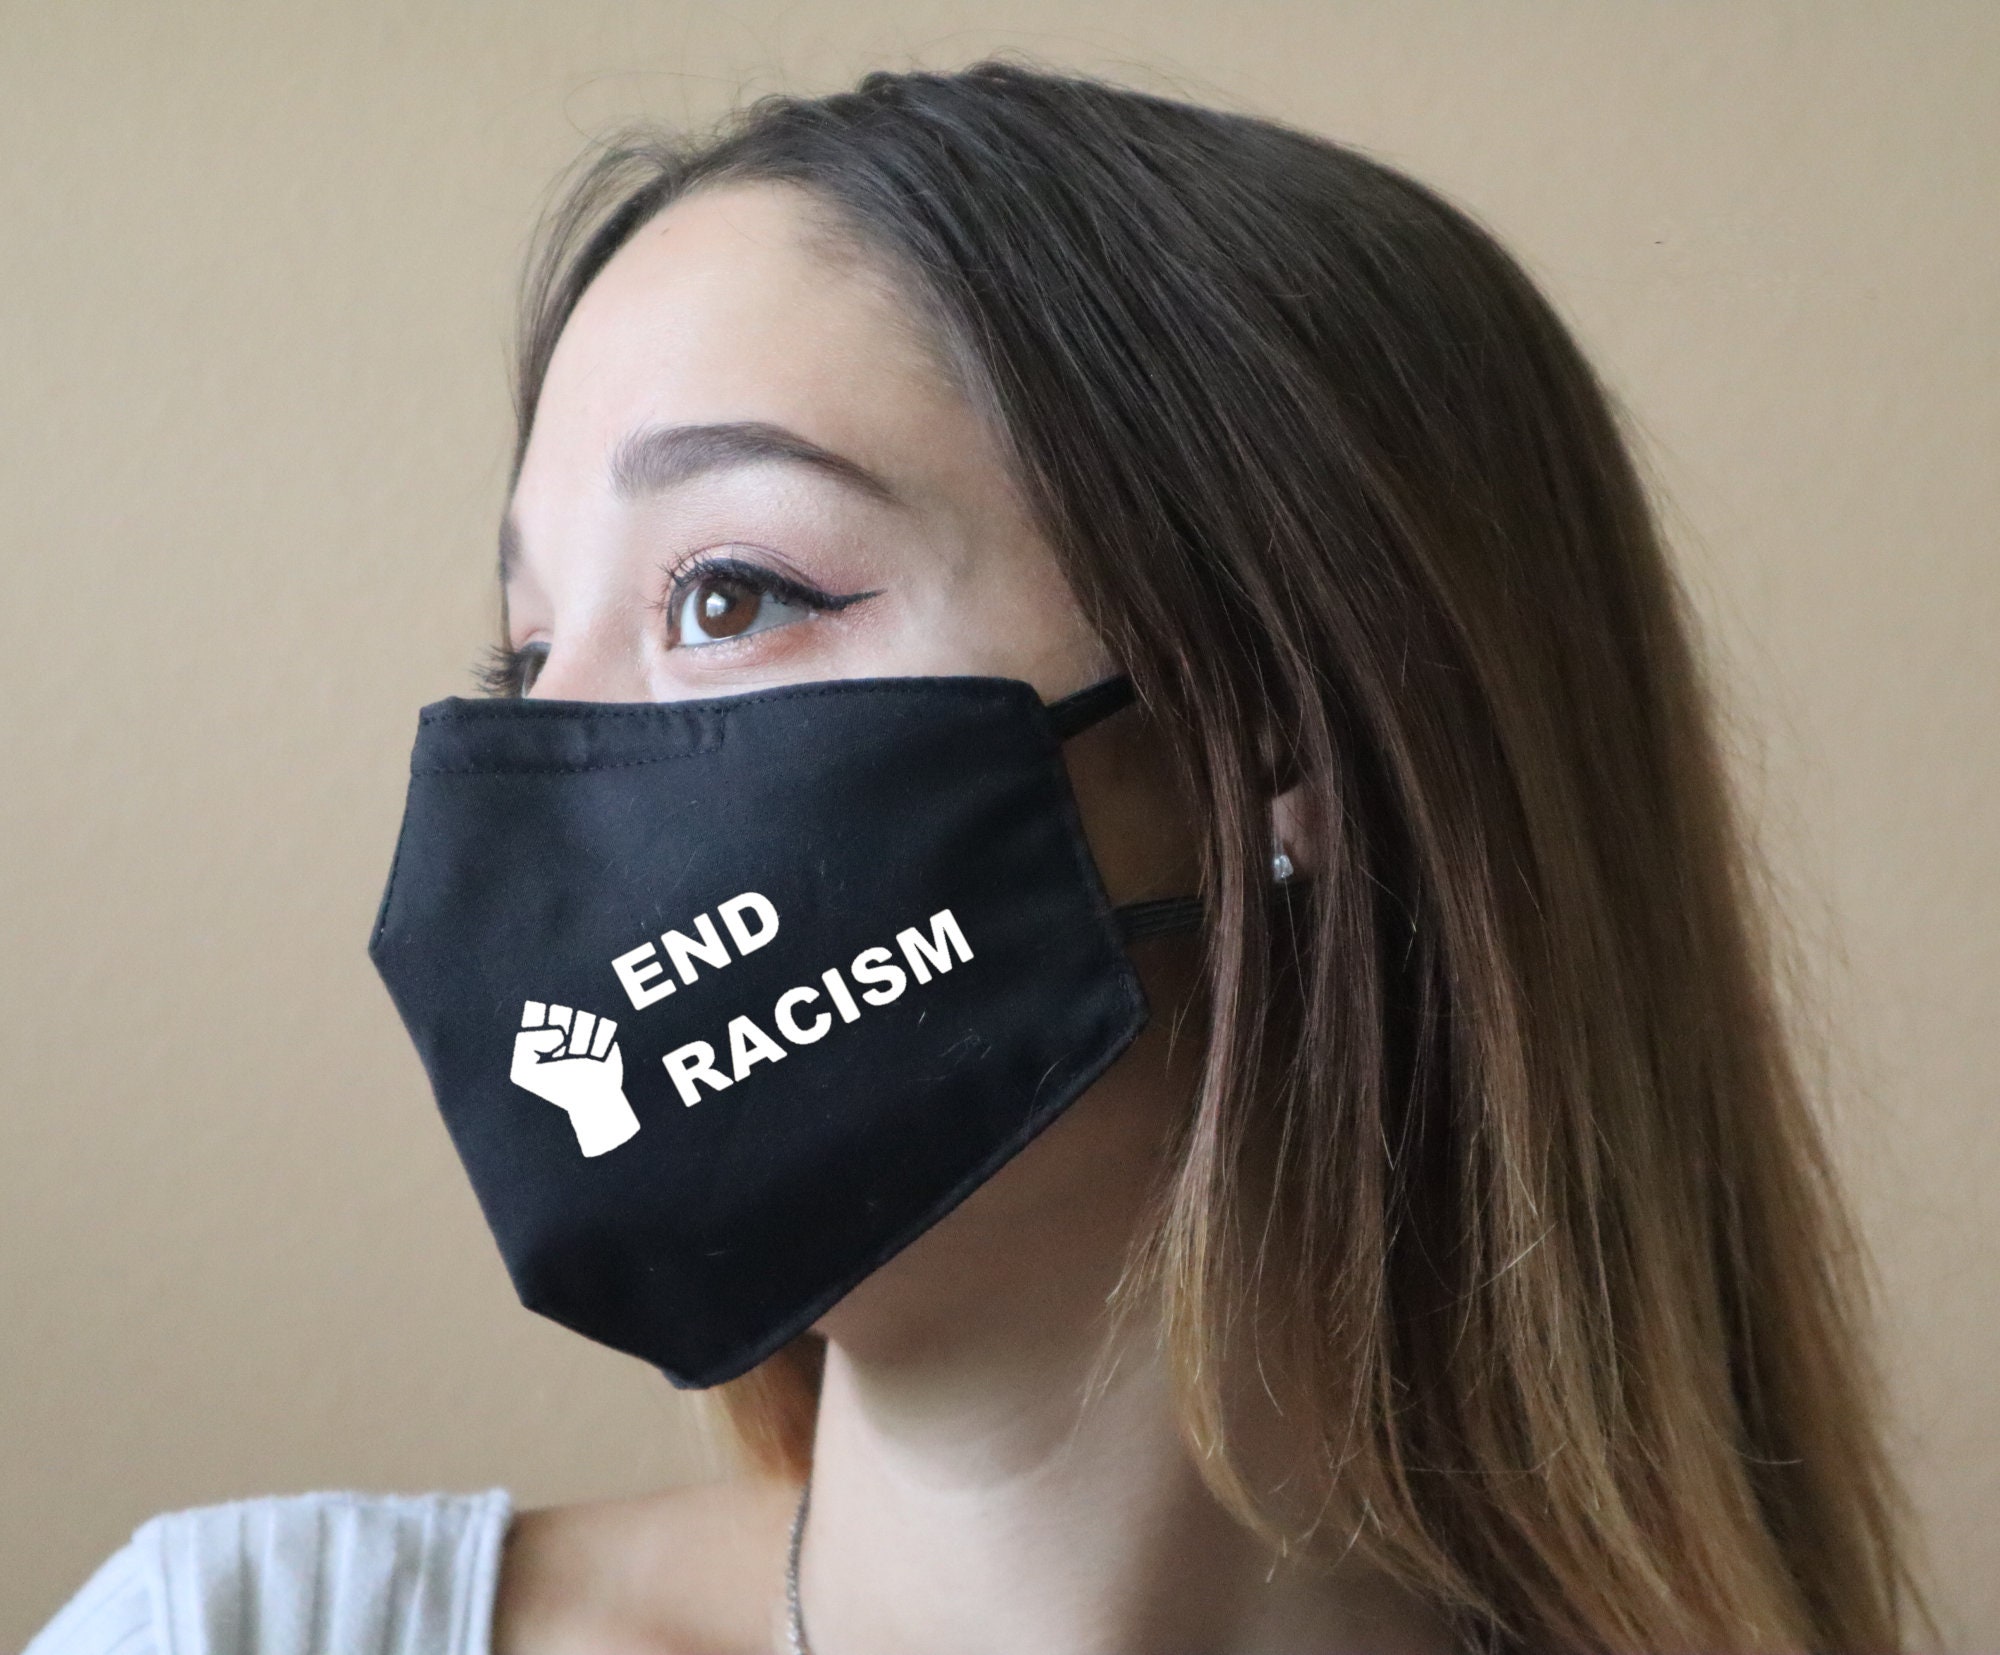 Handmade Cotton Blend Customizable Face Masks With Adjustable Ear-Loops - End Racism Adult Small 8 X 5"